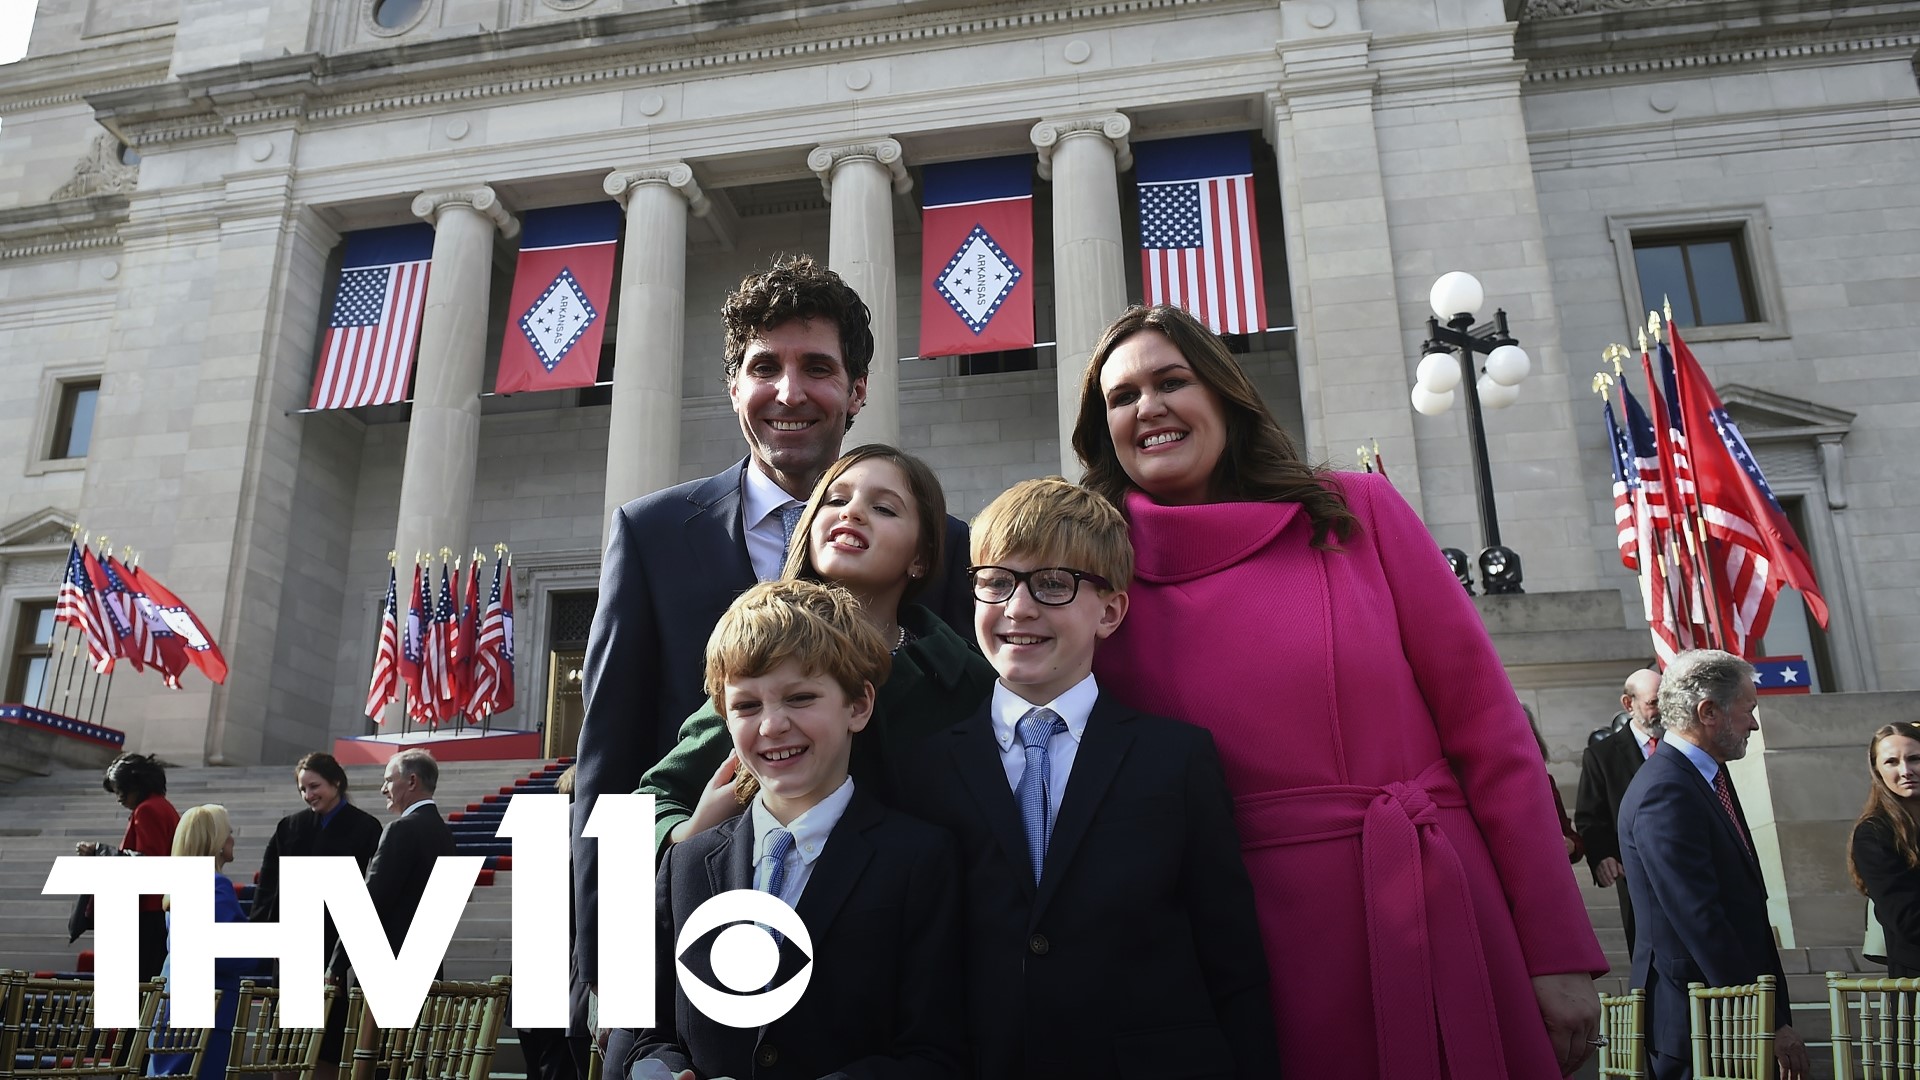 Hundreds of Arkansans watched today as Governor Sarah Huckabee Sanders gave her inaugural address and outlined her vision for the state for the next four years.